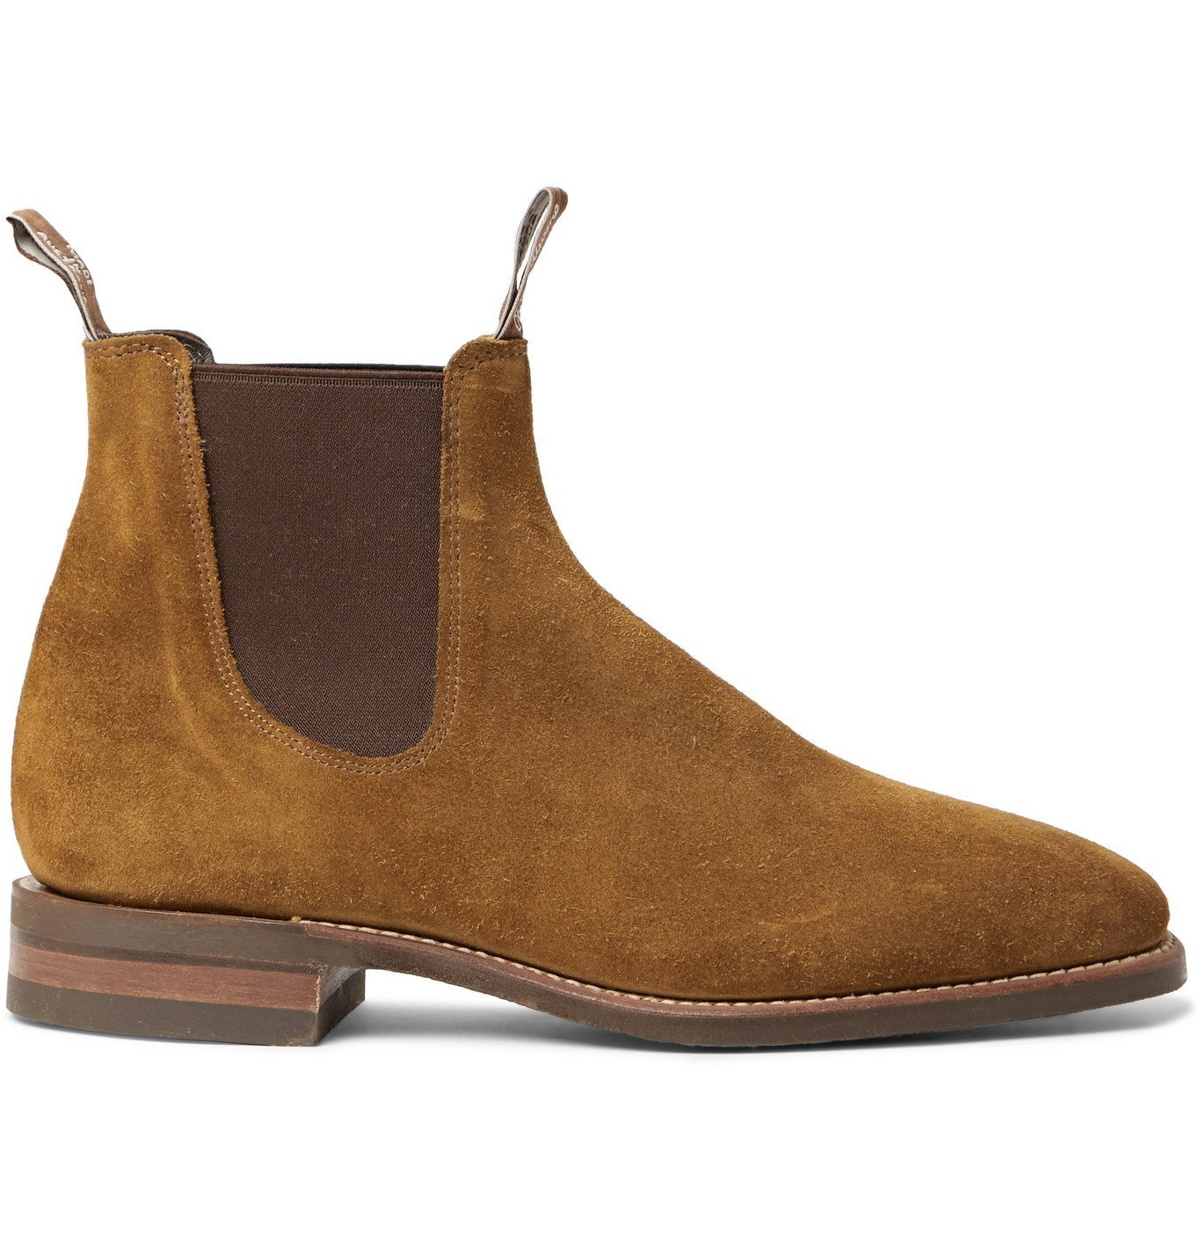 RM Williams Comfort Craftsman Chelsea Boots Pull On Suede Olive 9 UK 10 US